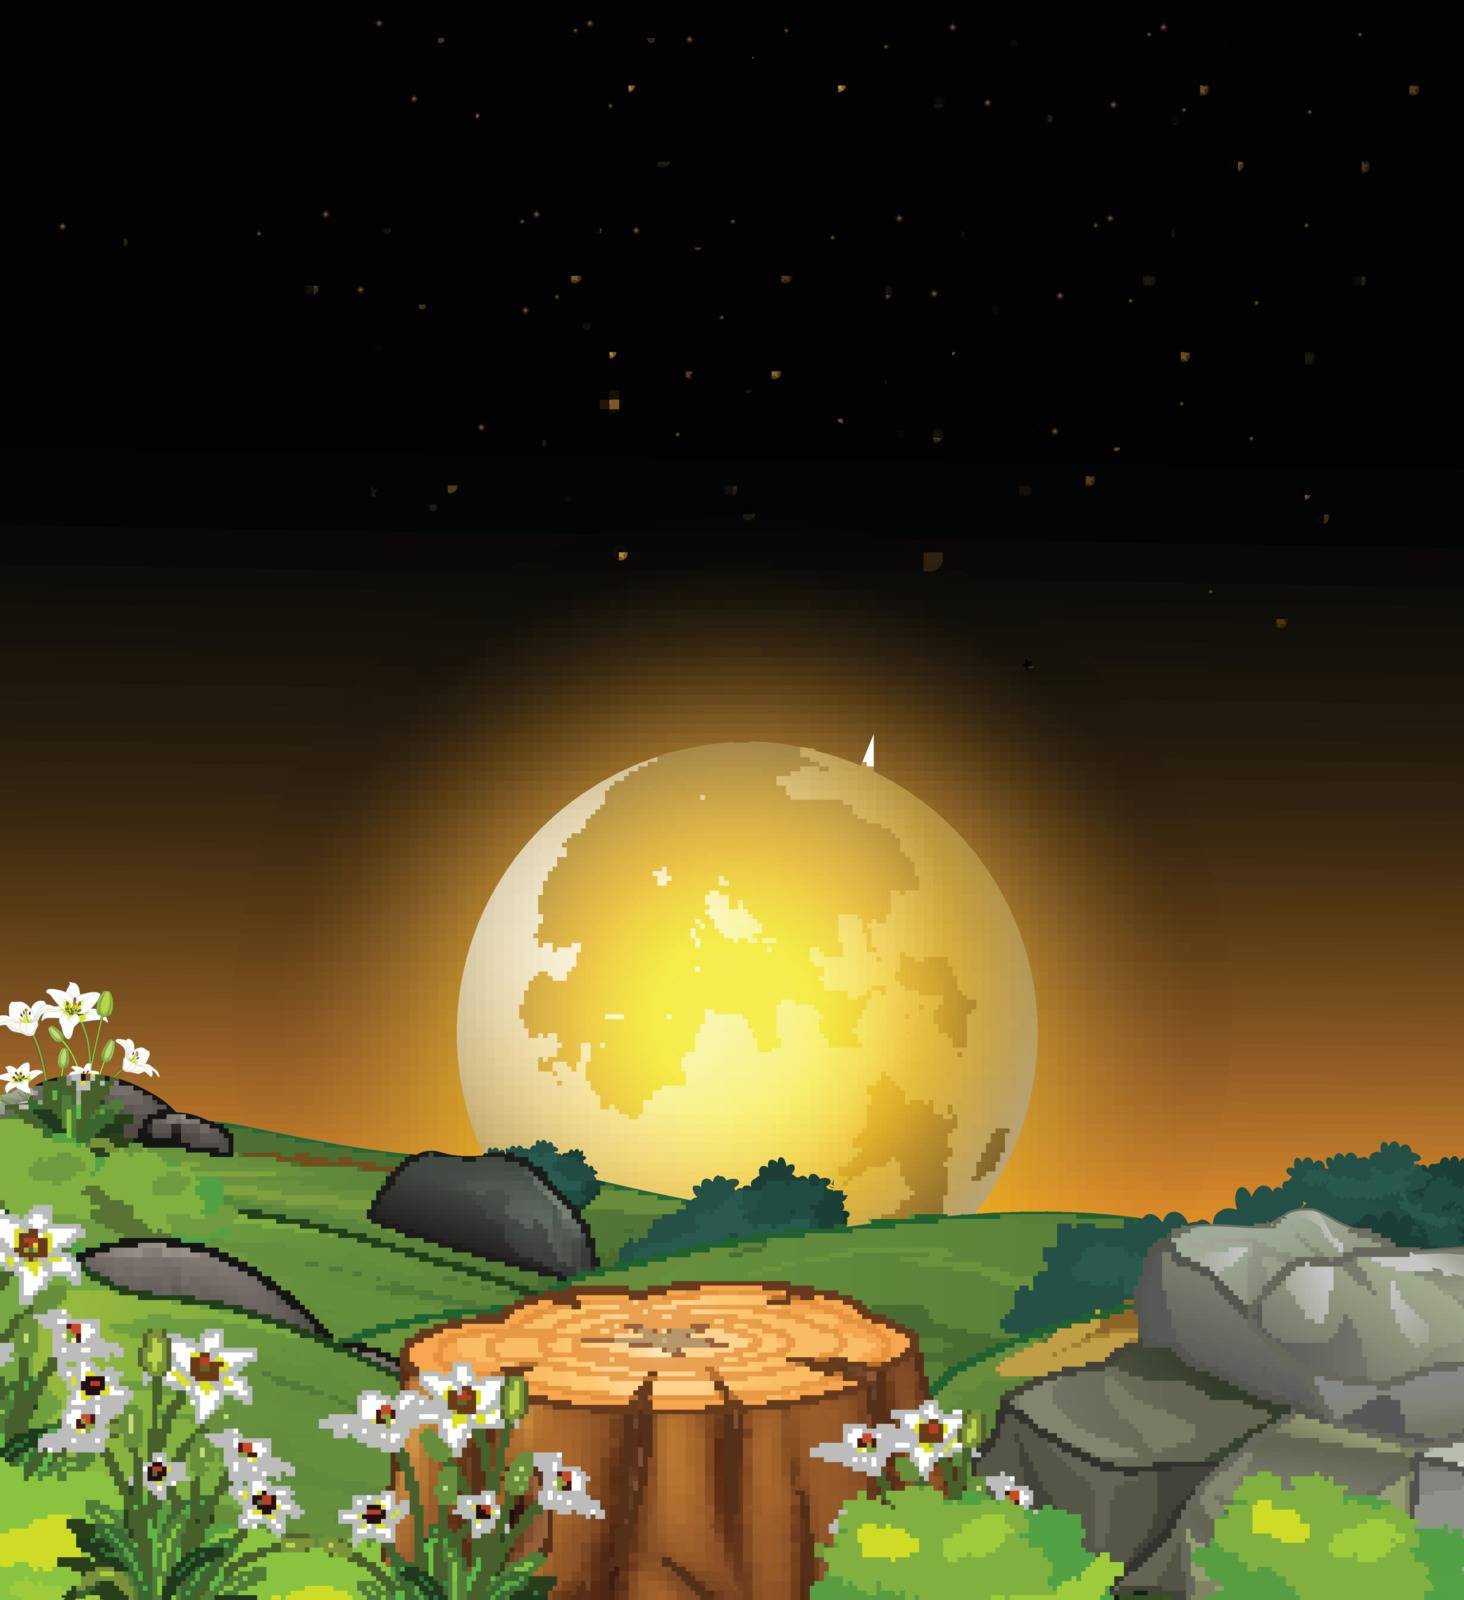 Landscape Grass Field Night View With Full Moonlight and White Ivy Flowers Cartoon by sujono